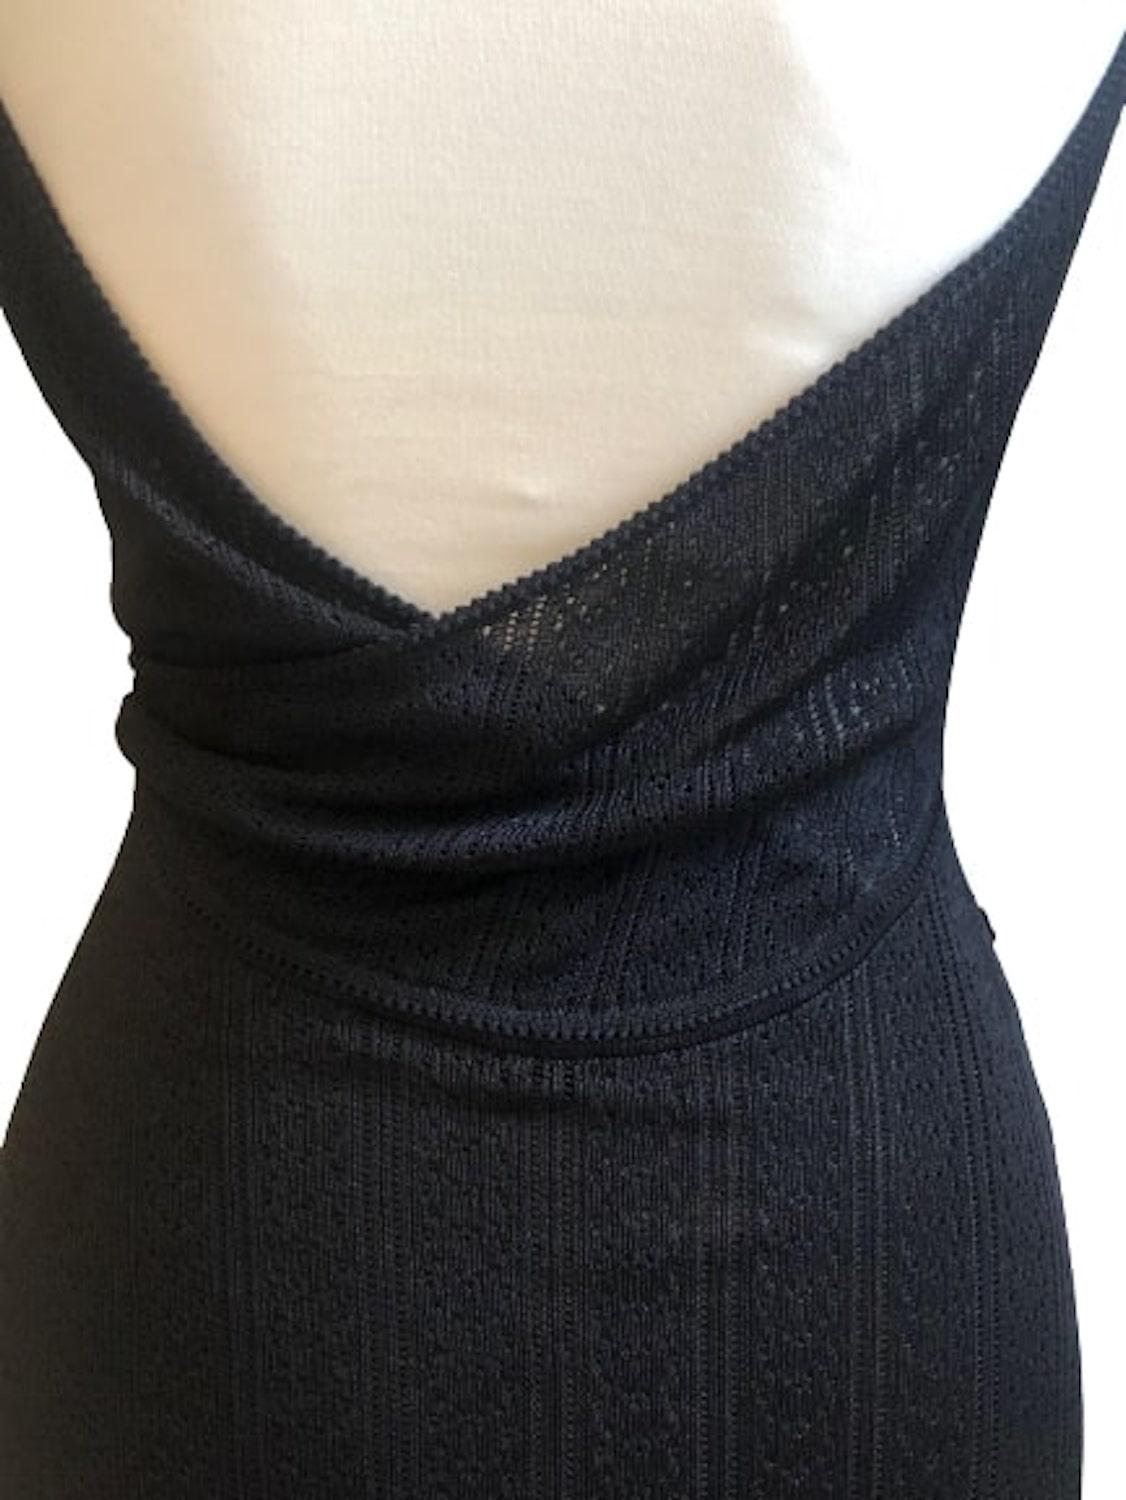 JOHN GALLIANO Black Knitted Lace Evening Mid Length Dress C.1998 For Sale 1